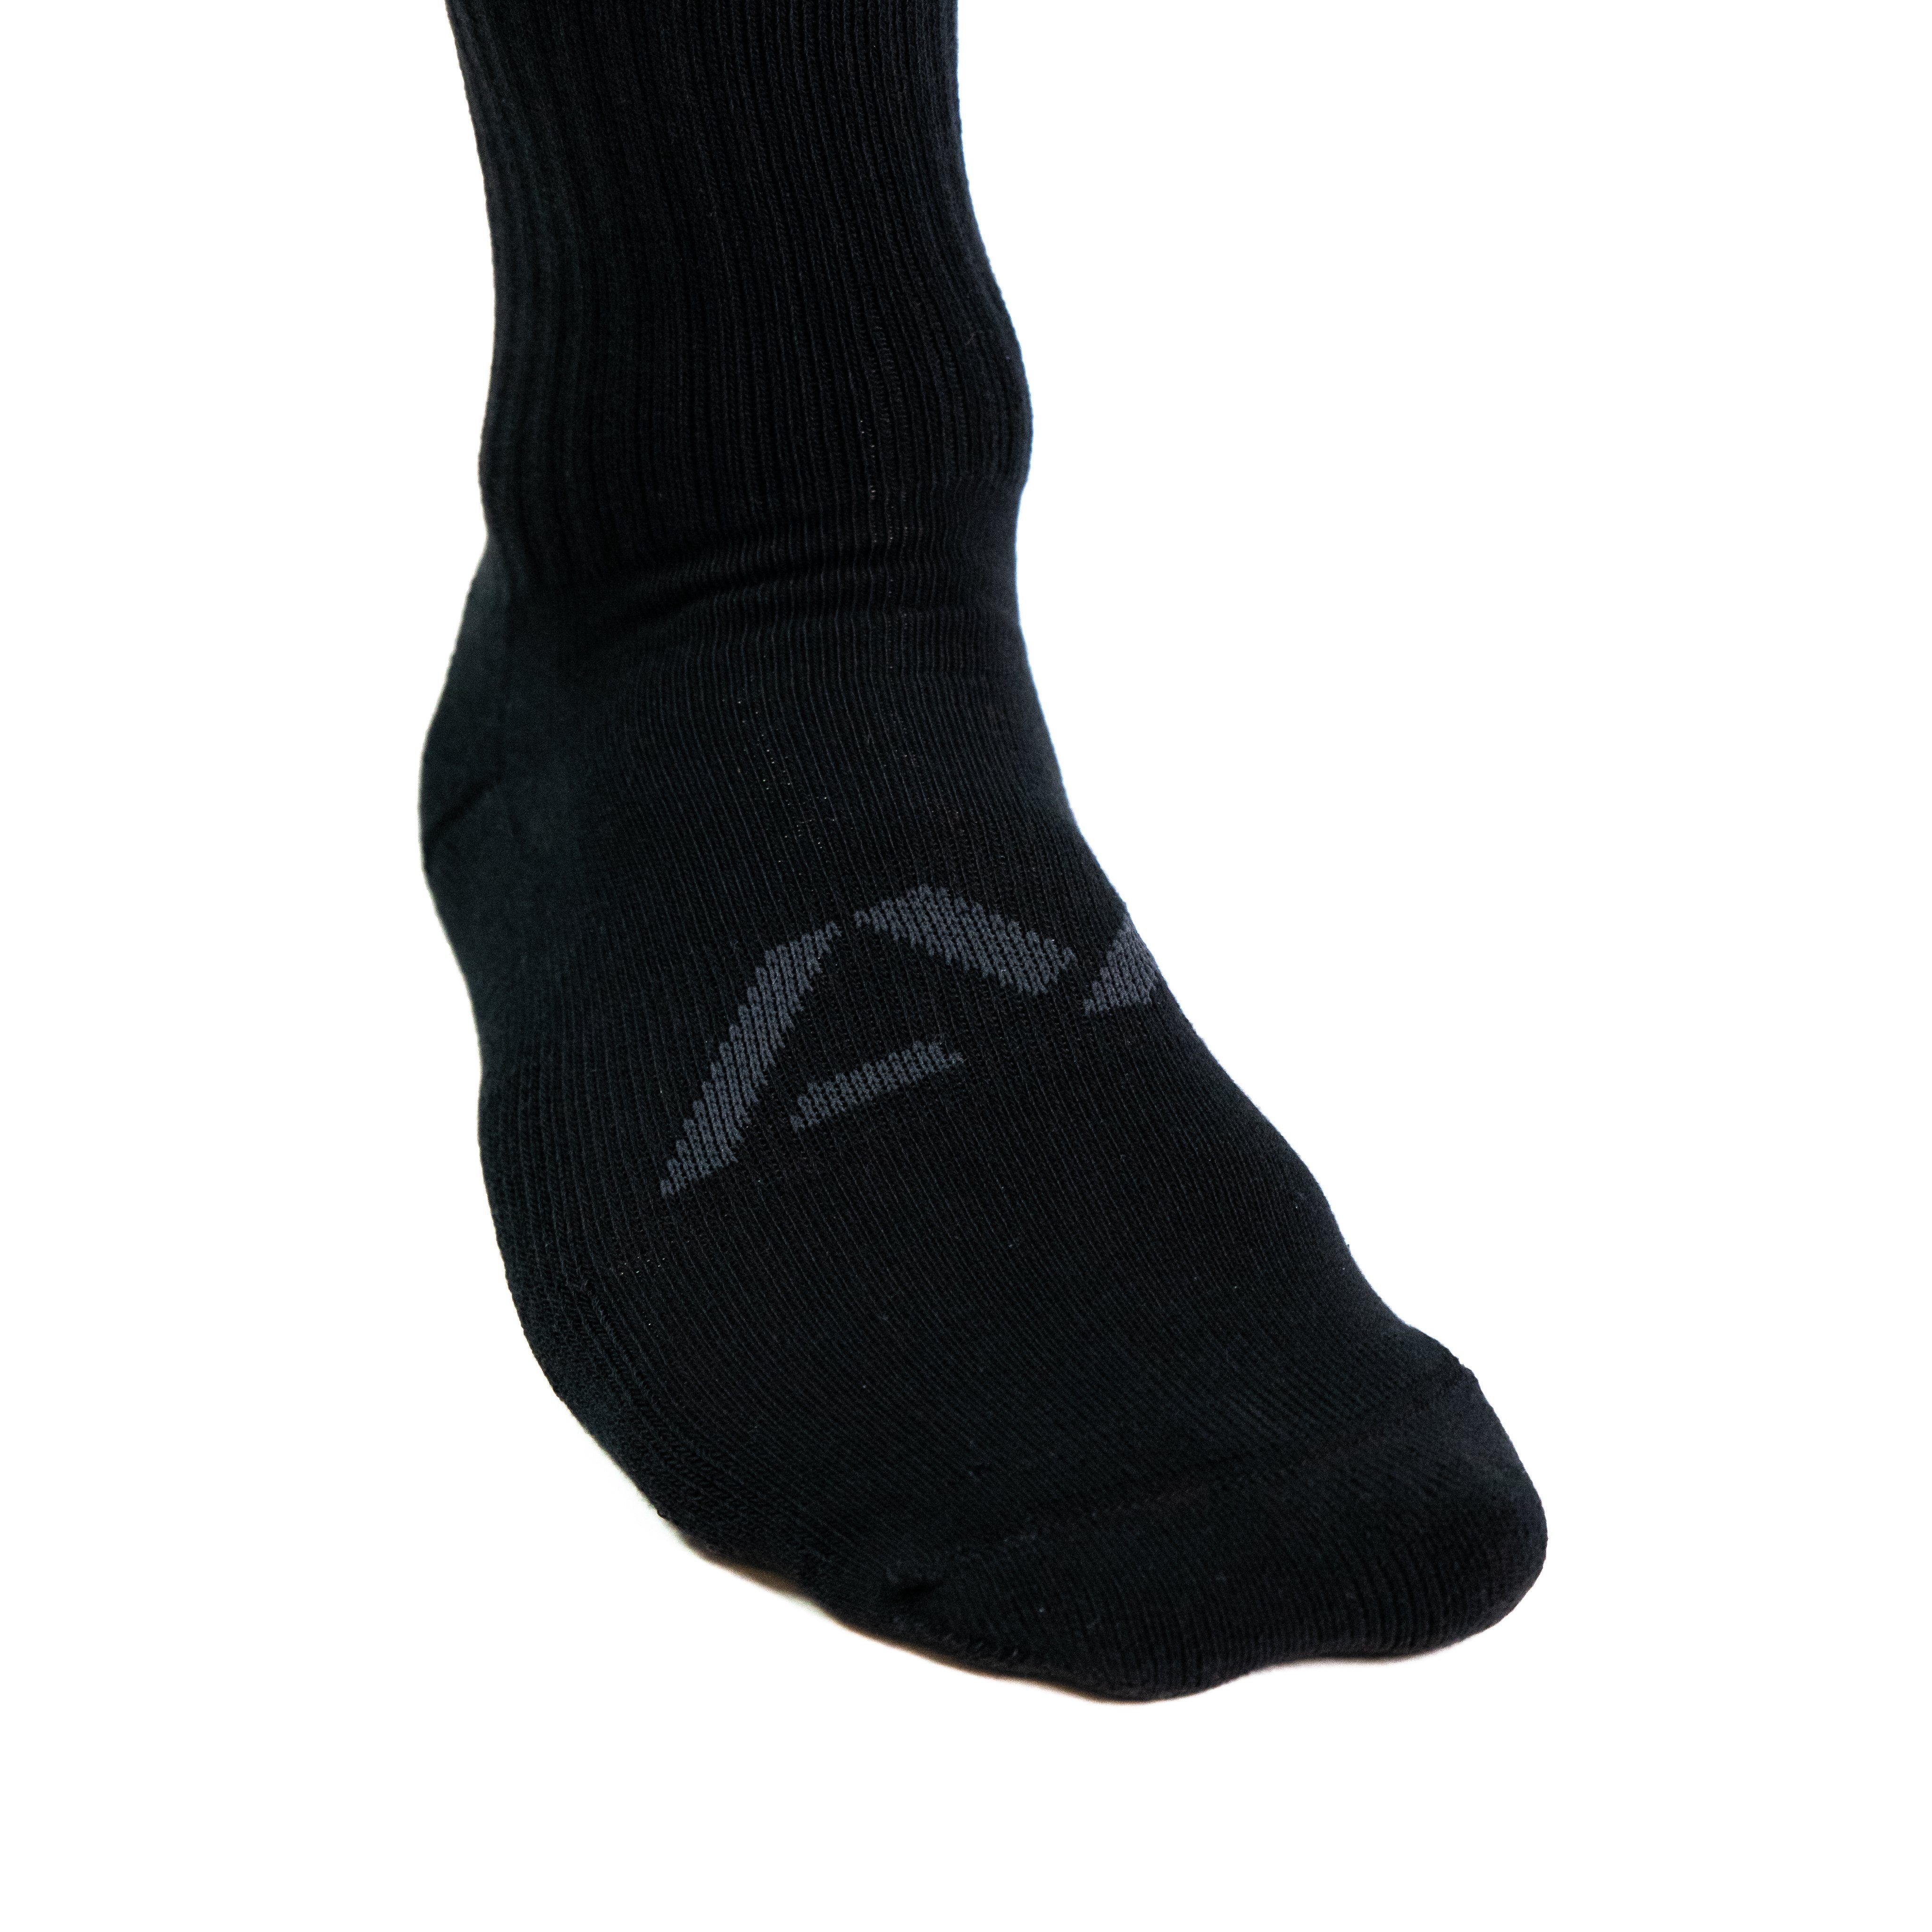 This Stealth Deadlift socks were created with muted out the logos and keep contrast at a minimum and let your energy show on the platform, in your training or while out and about. A colourway that lets your performance and dedication remain the focus while still providing the level of quality, support and comfort you demand from your products